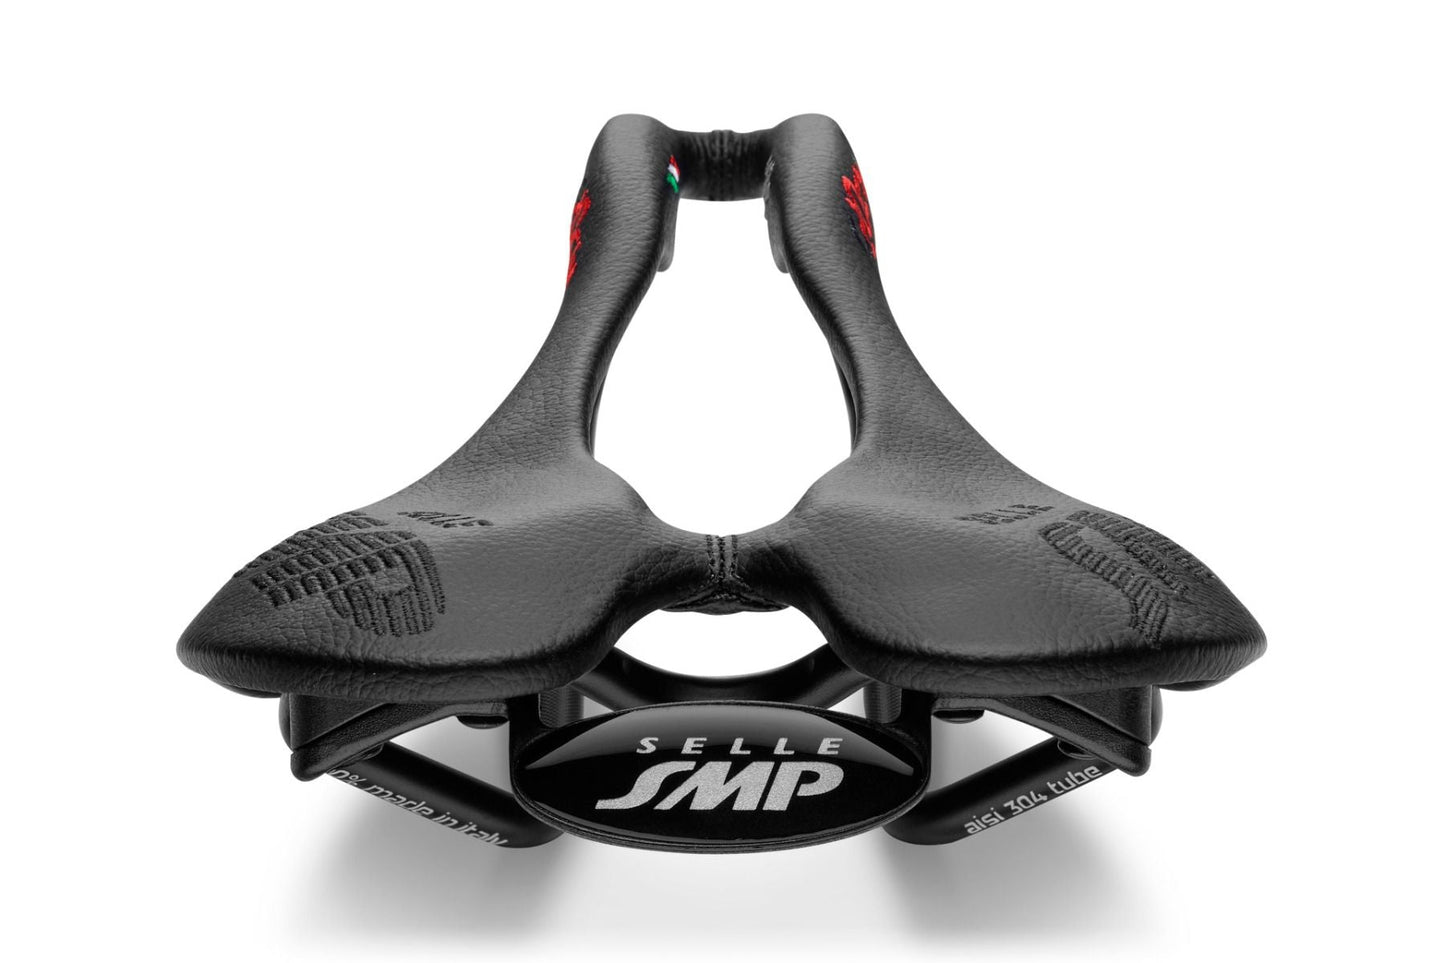 Selle SMP F20C s.i. Bicycle Saddle with Steel Rails (Black)